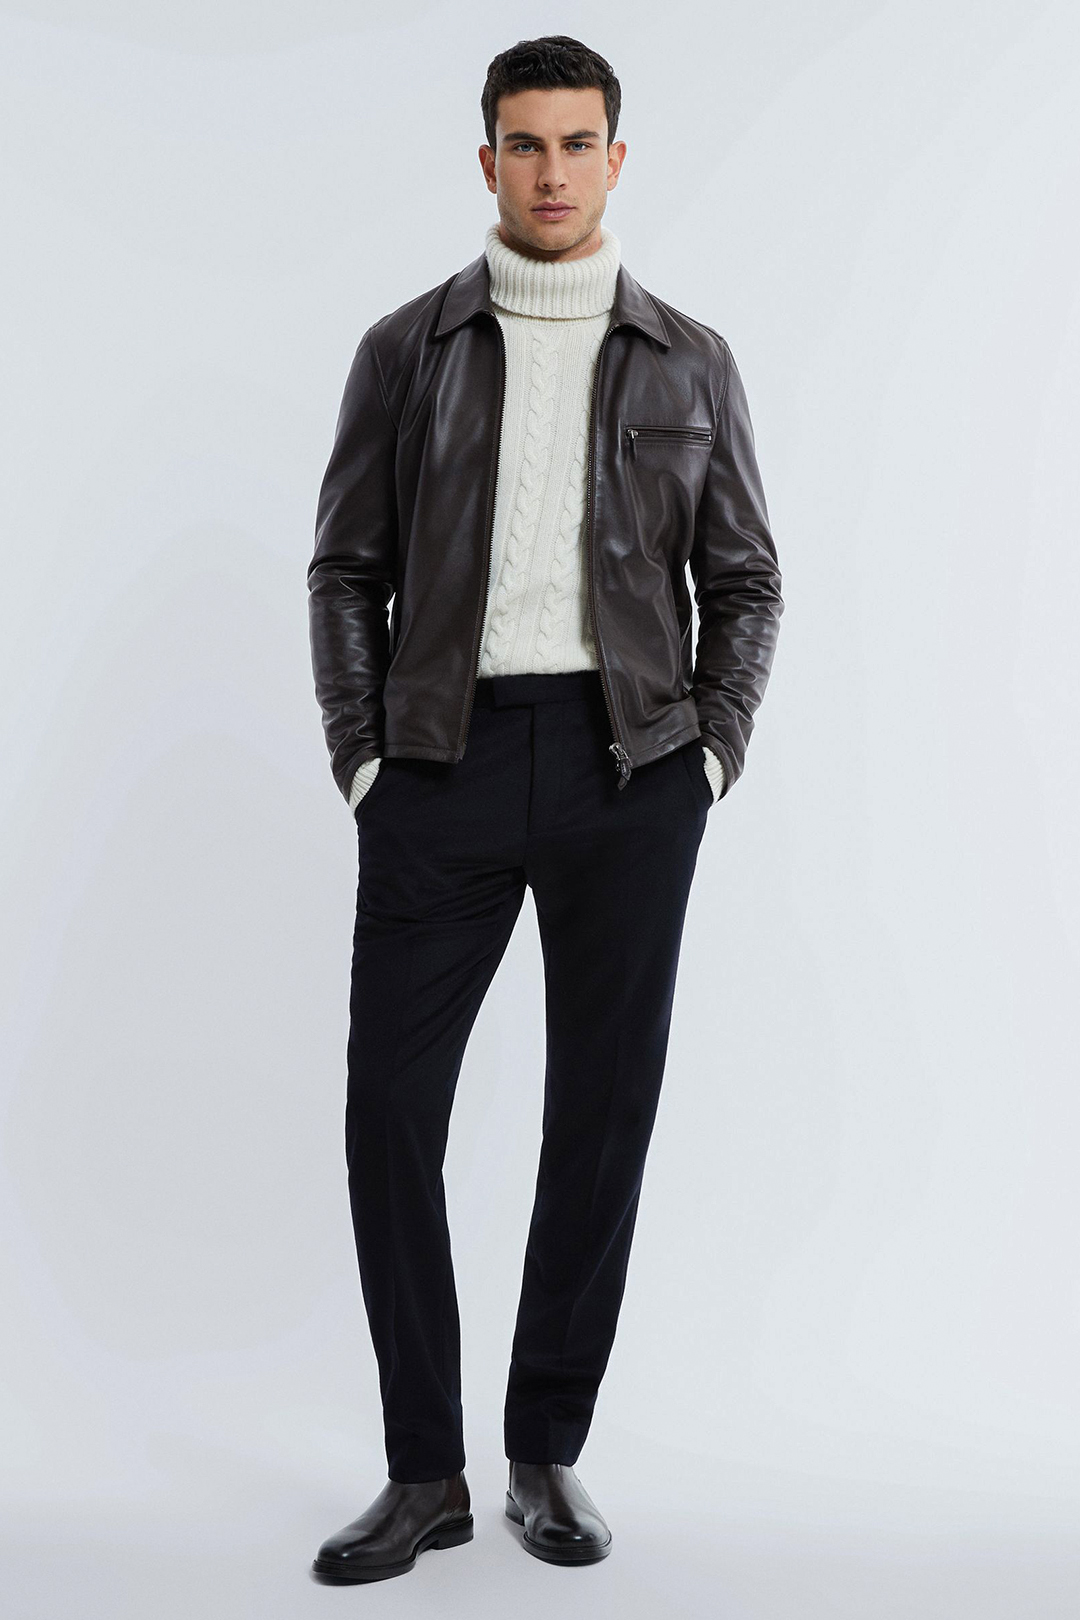 Dark brown leather foster jacket, white turtleneck, black dress pants, and brown Chelsea boots outfit